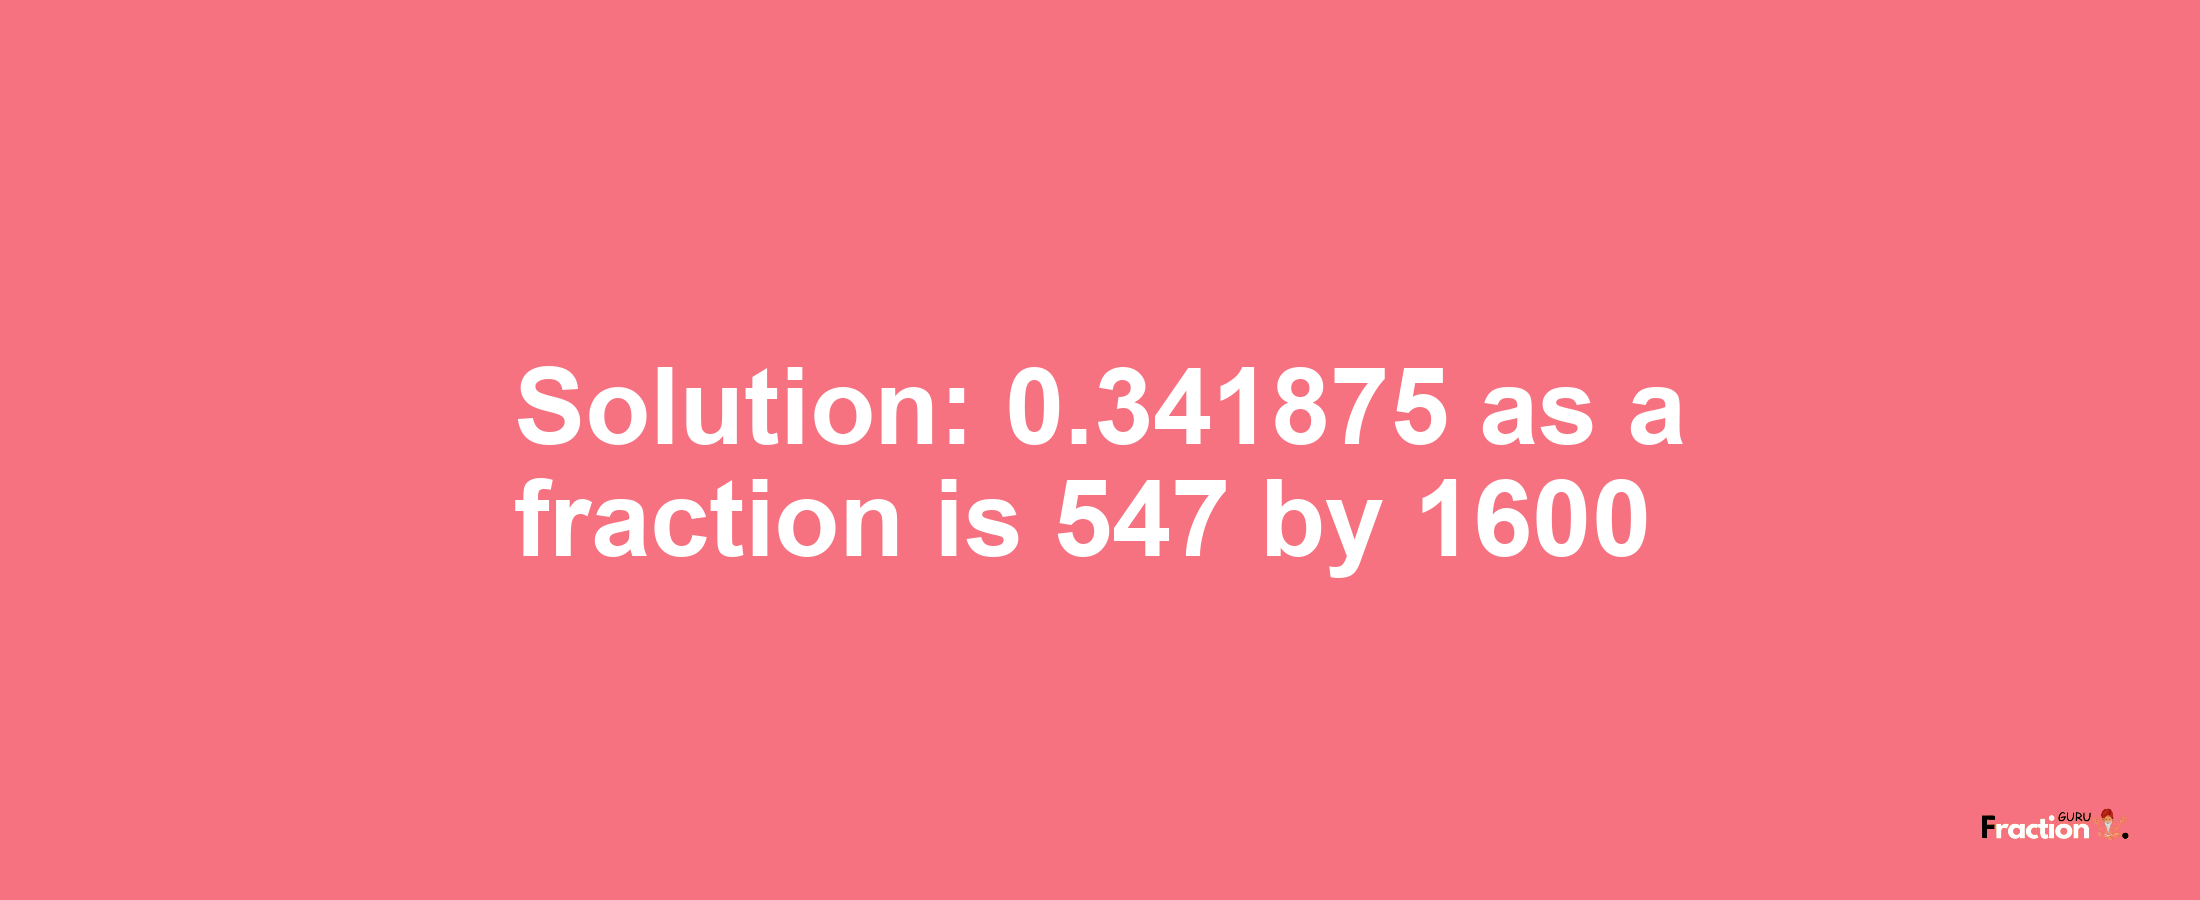 Solution:0.341875 as a fraction is 547/1600